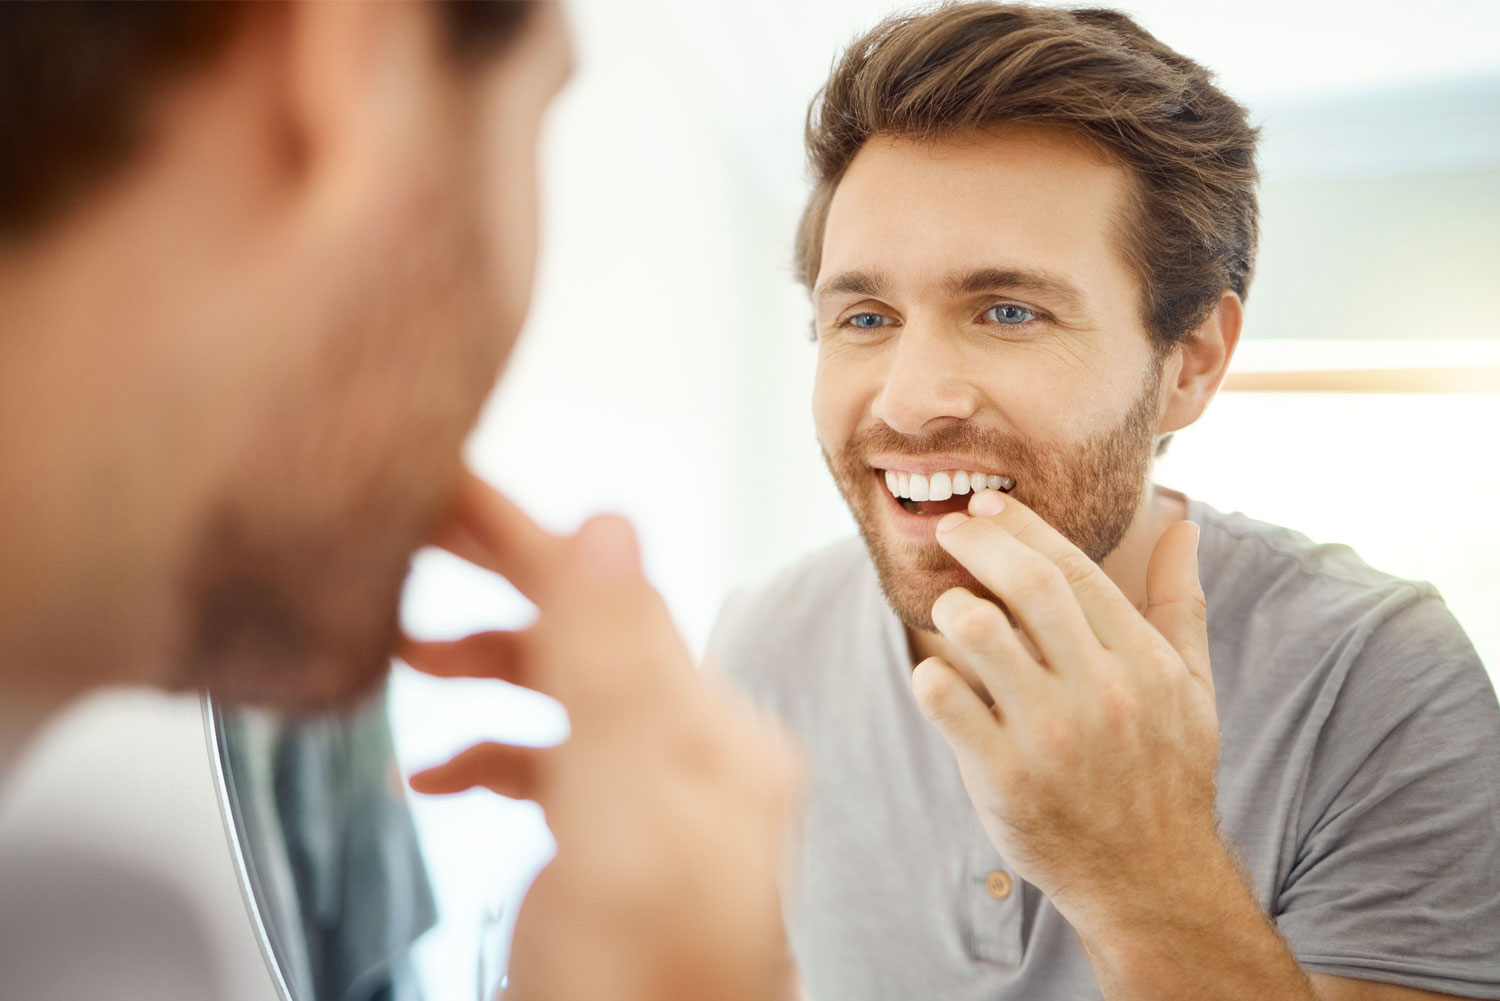 Man Checking his teeth in the mirror in his morning routine